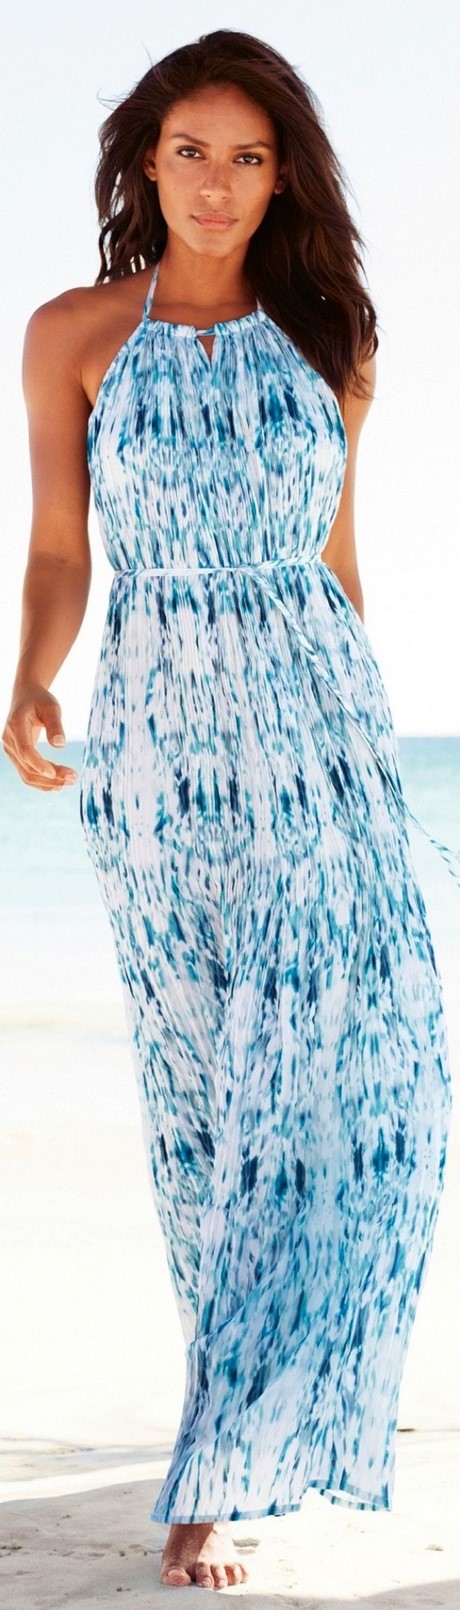 long-casual-dresses-for-summer-46_14 Long casual dresses for summer